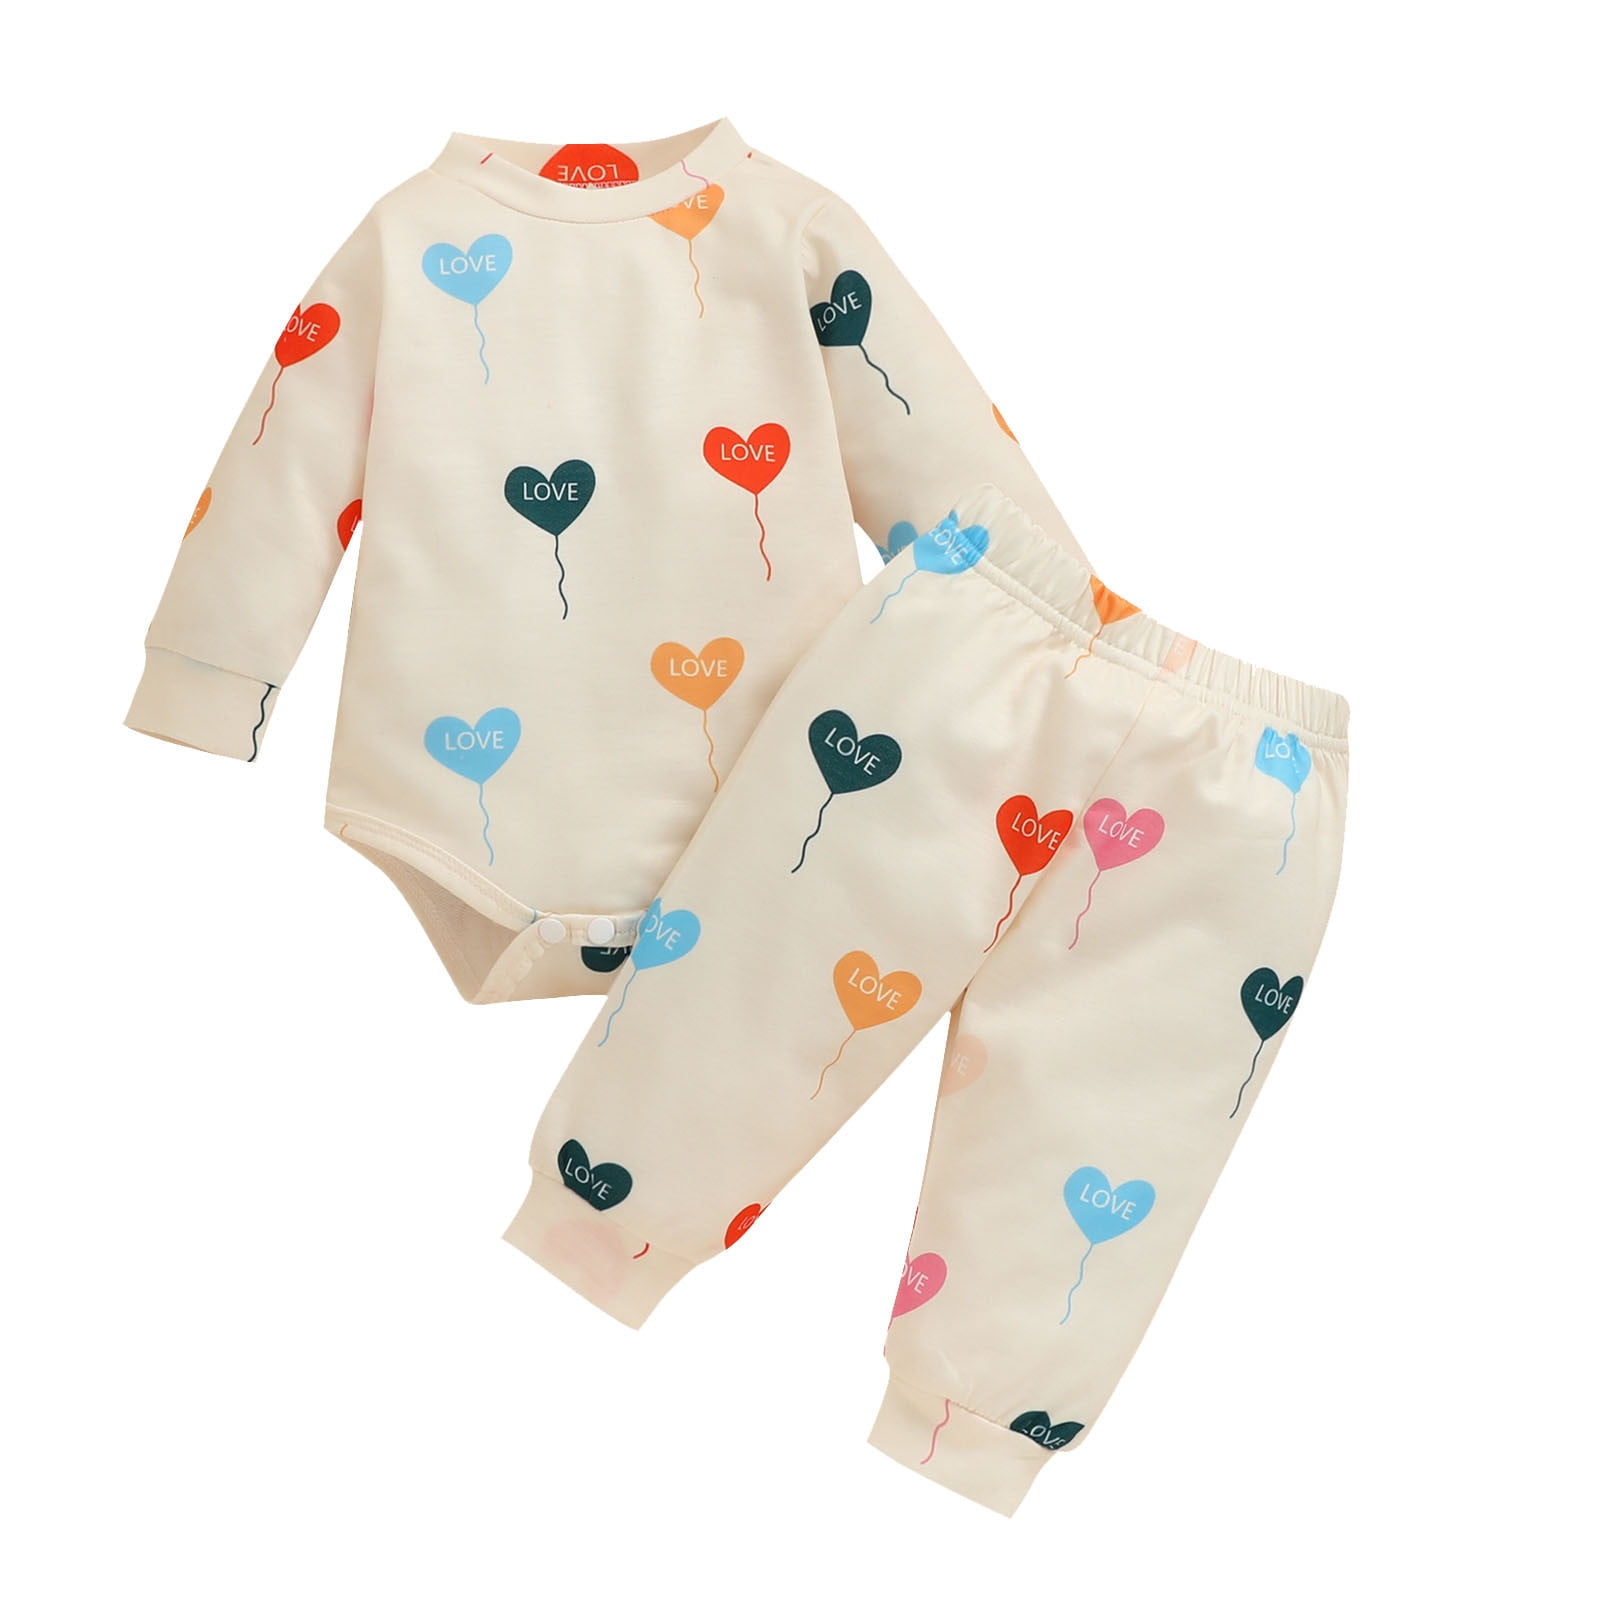 Infant Boys Girls Valentine's Day Long Sleeve Hearts Printed Romper ...